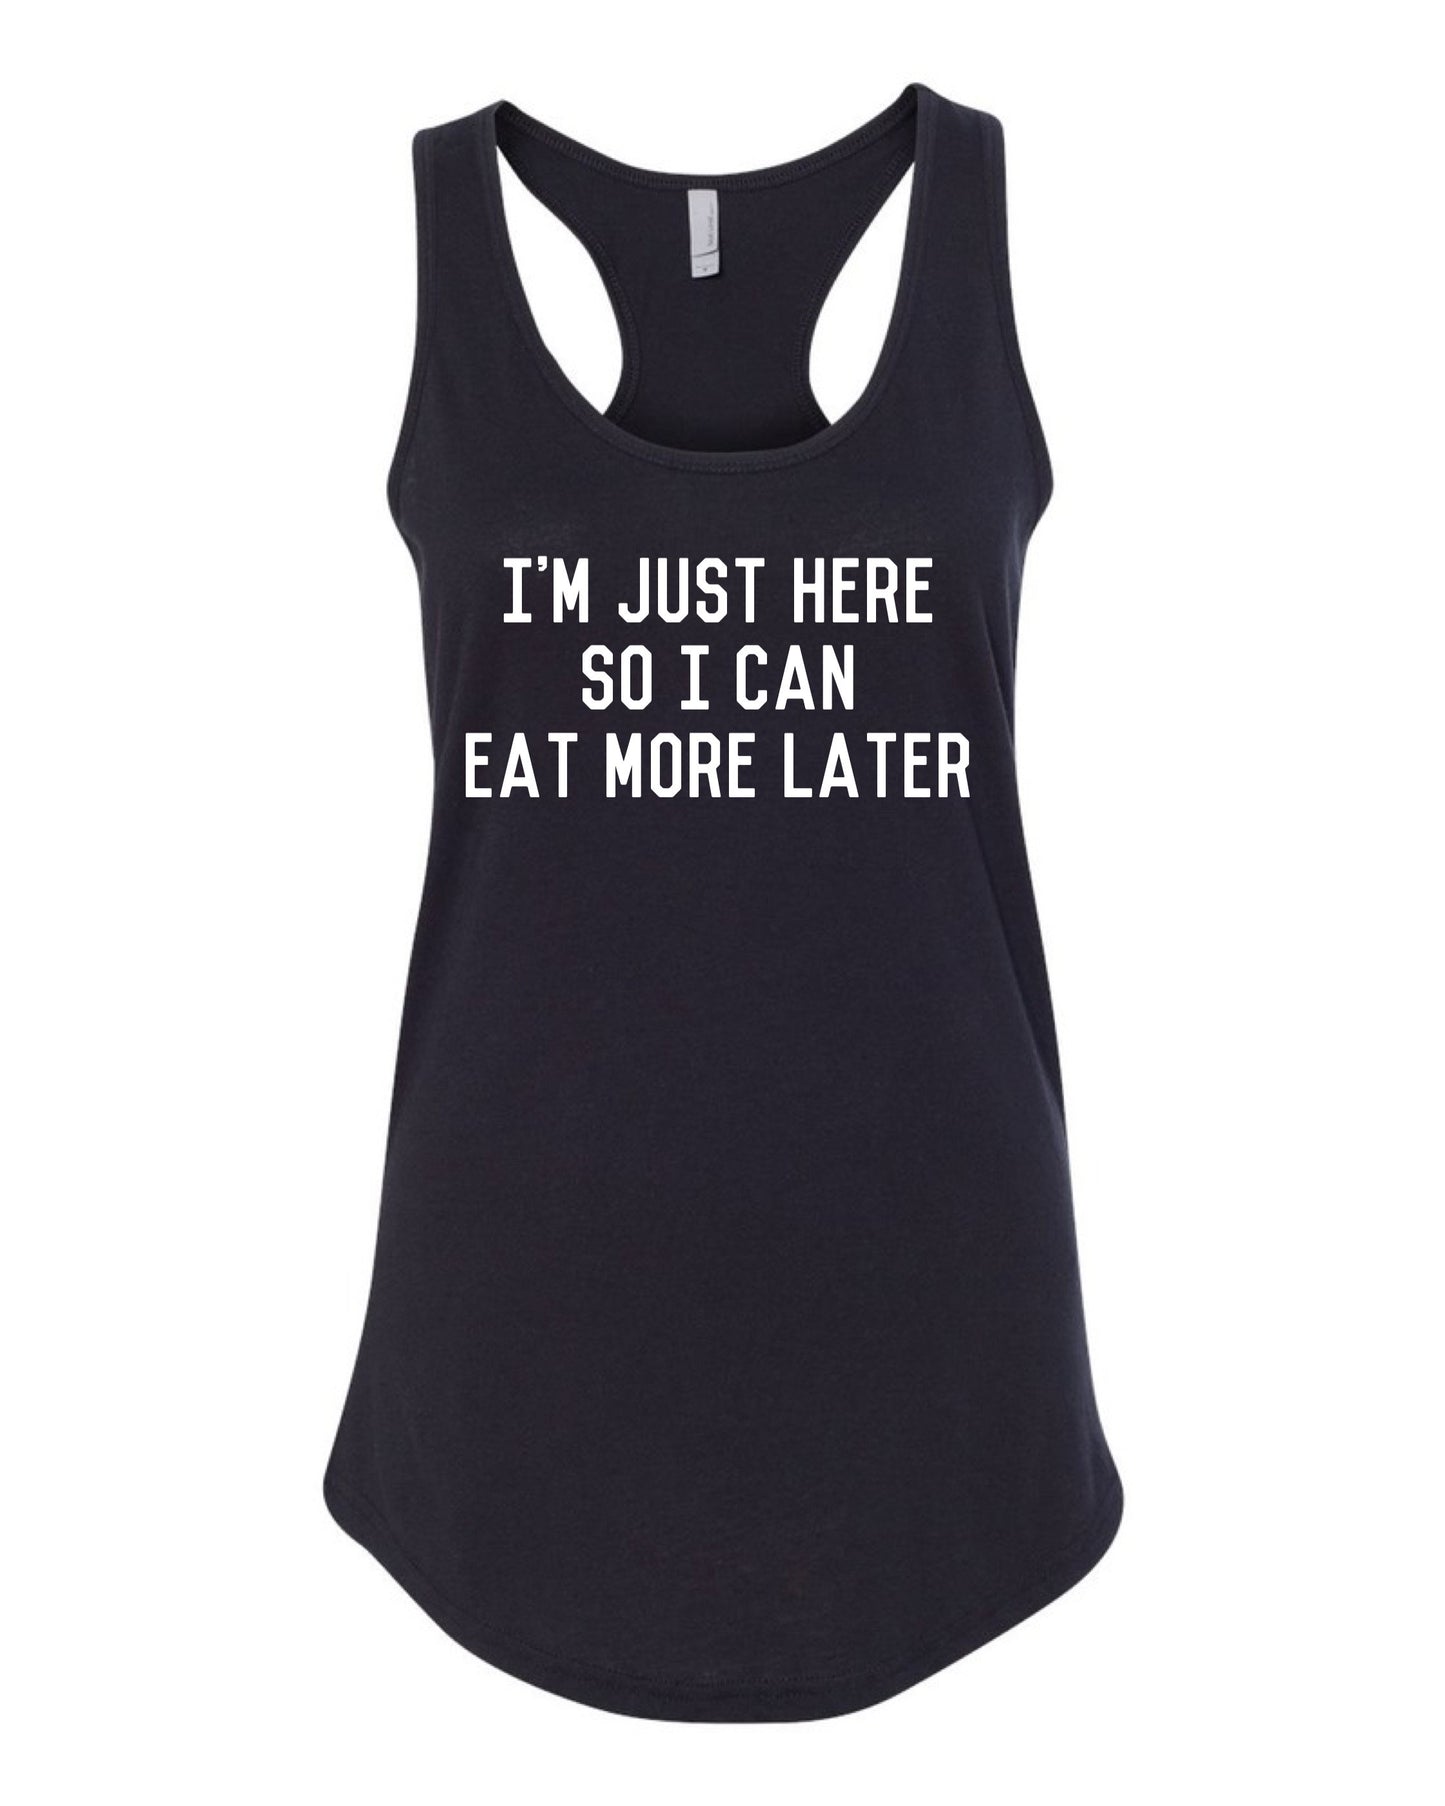 I'm just here so I can eat more later, workout tank, funny work out shirt, gym shirt, gym workout shirt, funny workout t, gym workout shirt